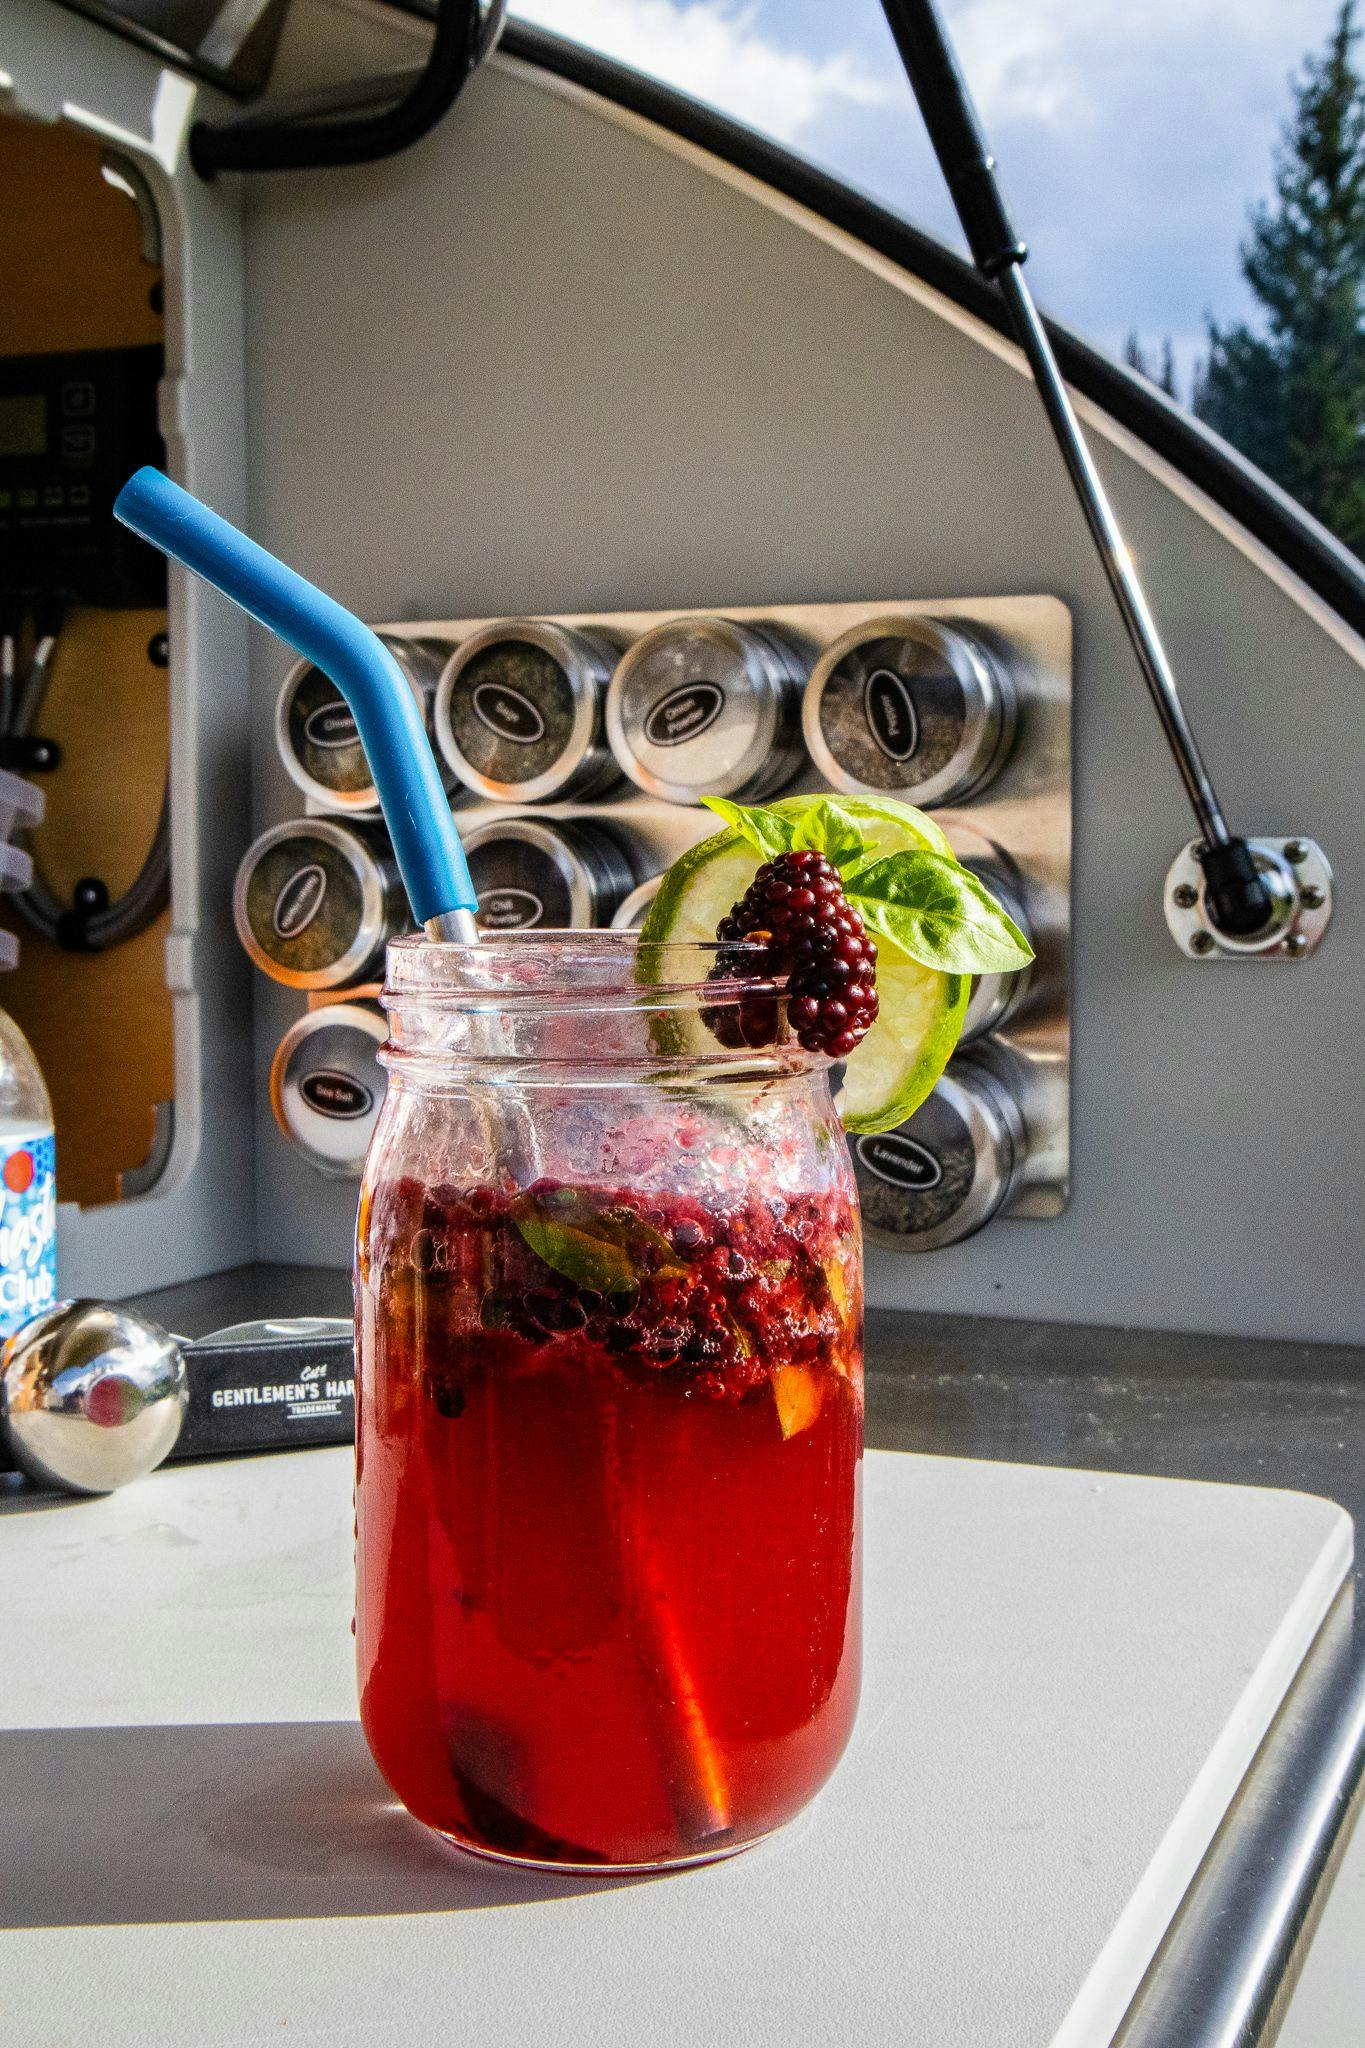 A red cocktail garnished with lime and blackberries set up in the galley of a teardrop camper.